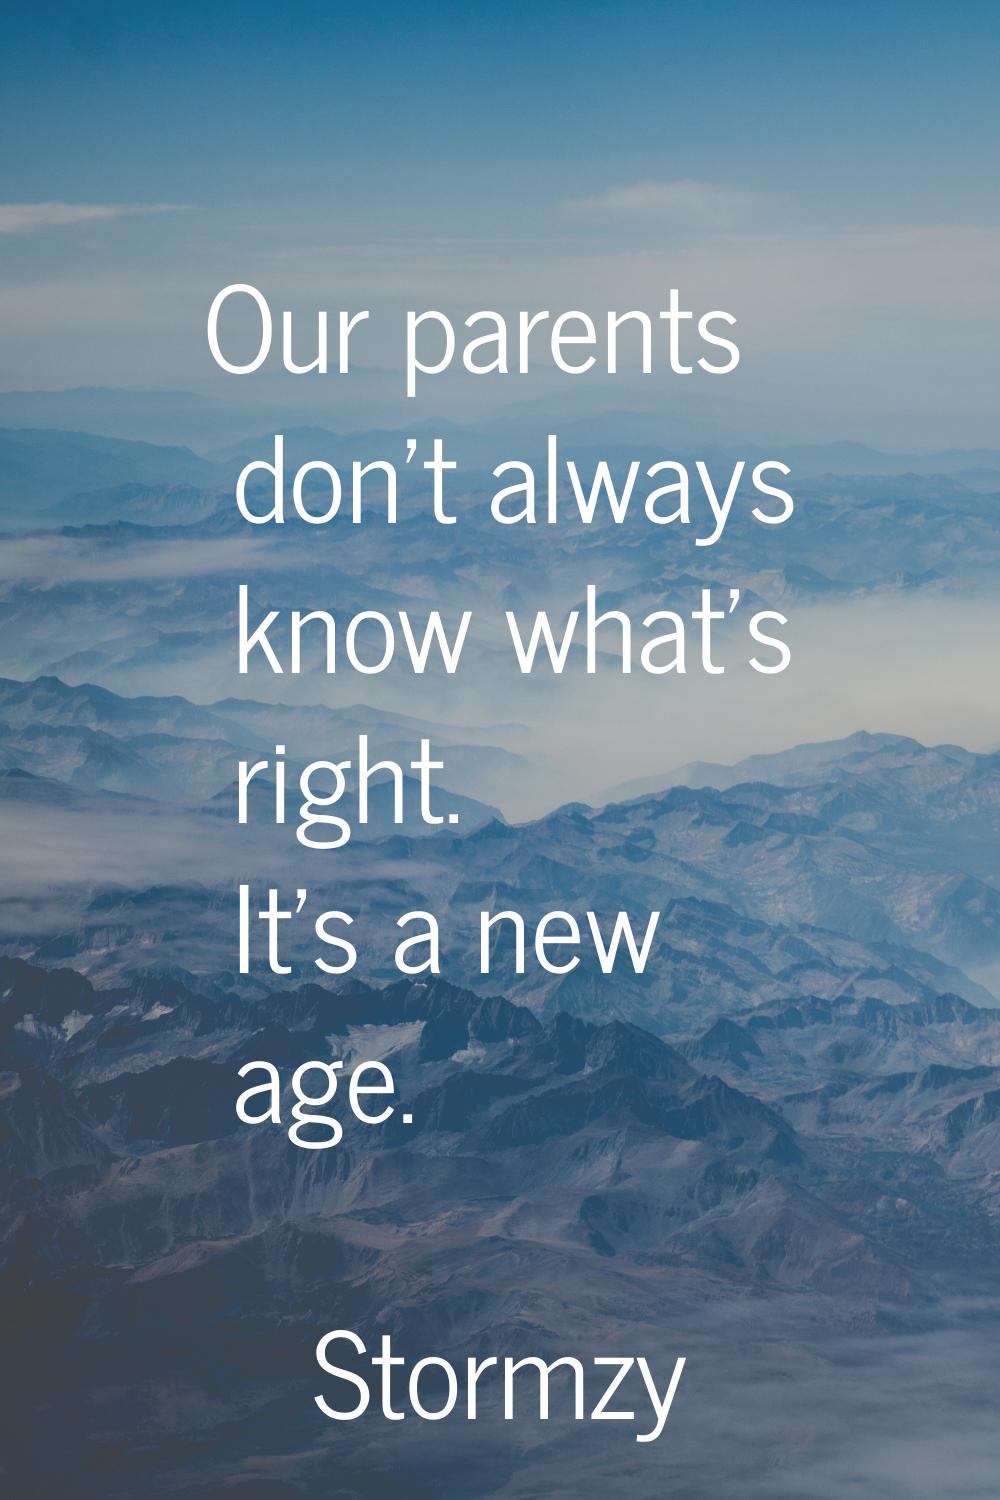 Our parents don't always know what's right. It's a new age.